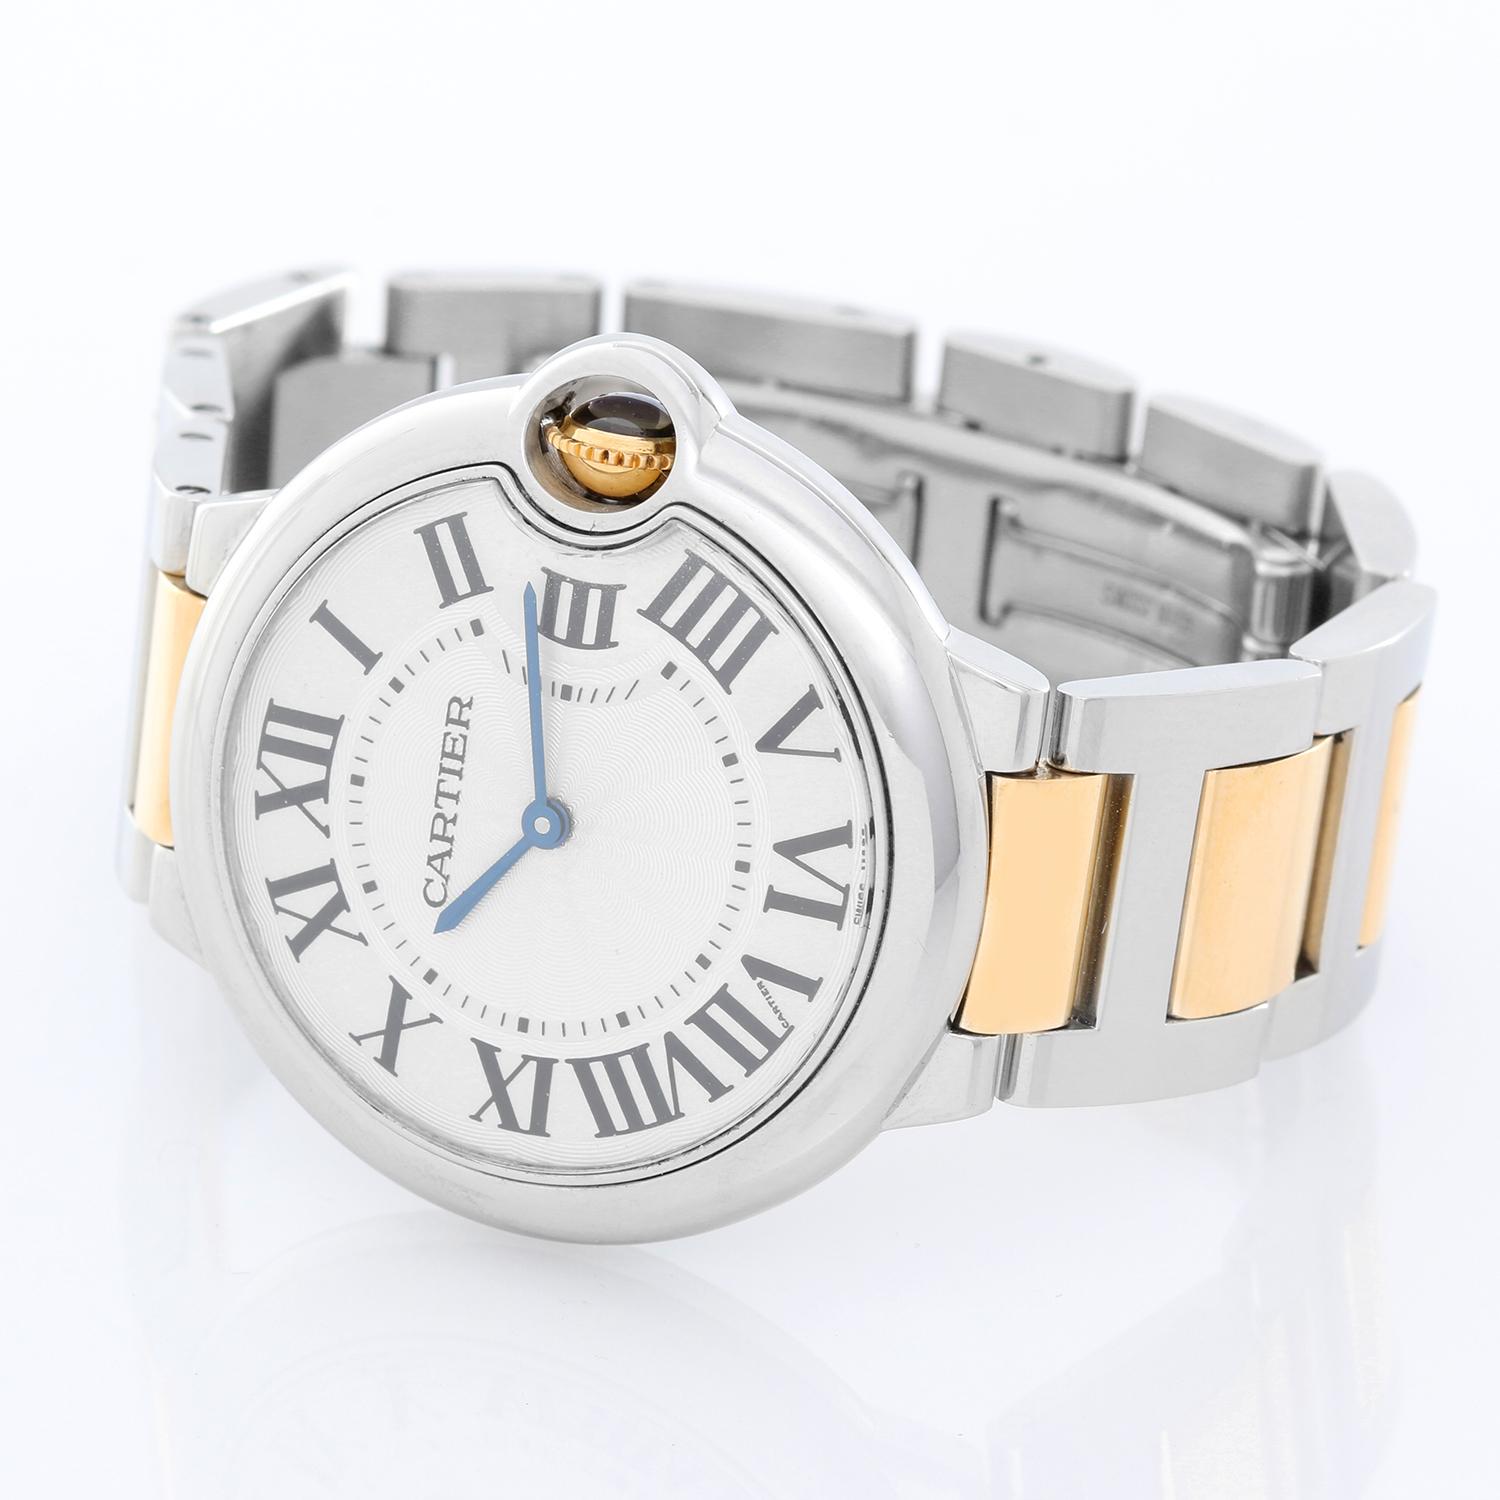 Cartier Ballon Bleu Midsize Stainless Steel Mens/Ladies Watch W69011Z4 - Quartz. Stainless steel case (36mm diameter). Silver guilloche dial with black Roman numerals. Stainless steel Cartier bracelet with deployant clasp. Pre-owned with  Cartier